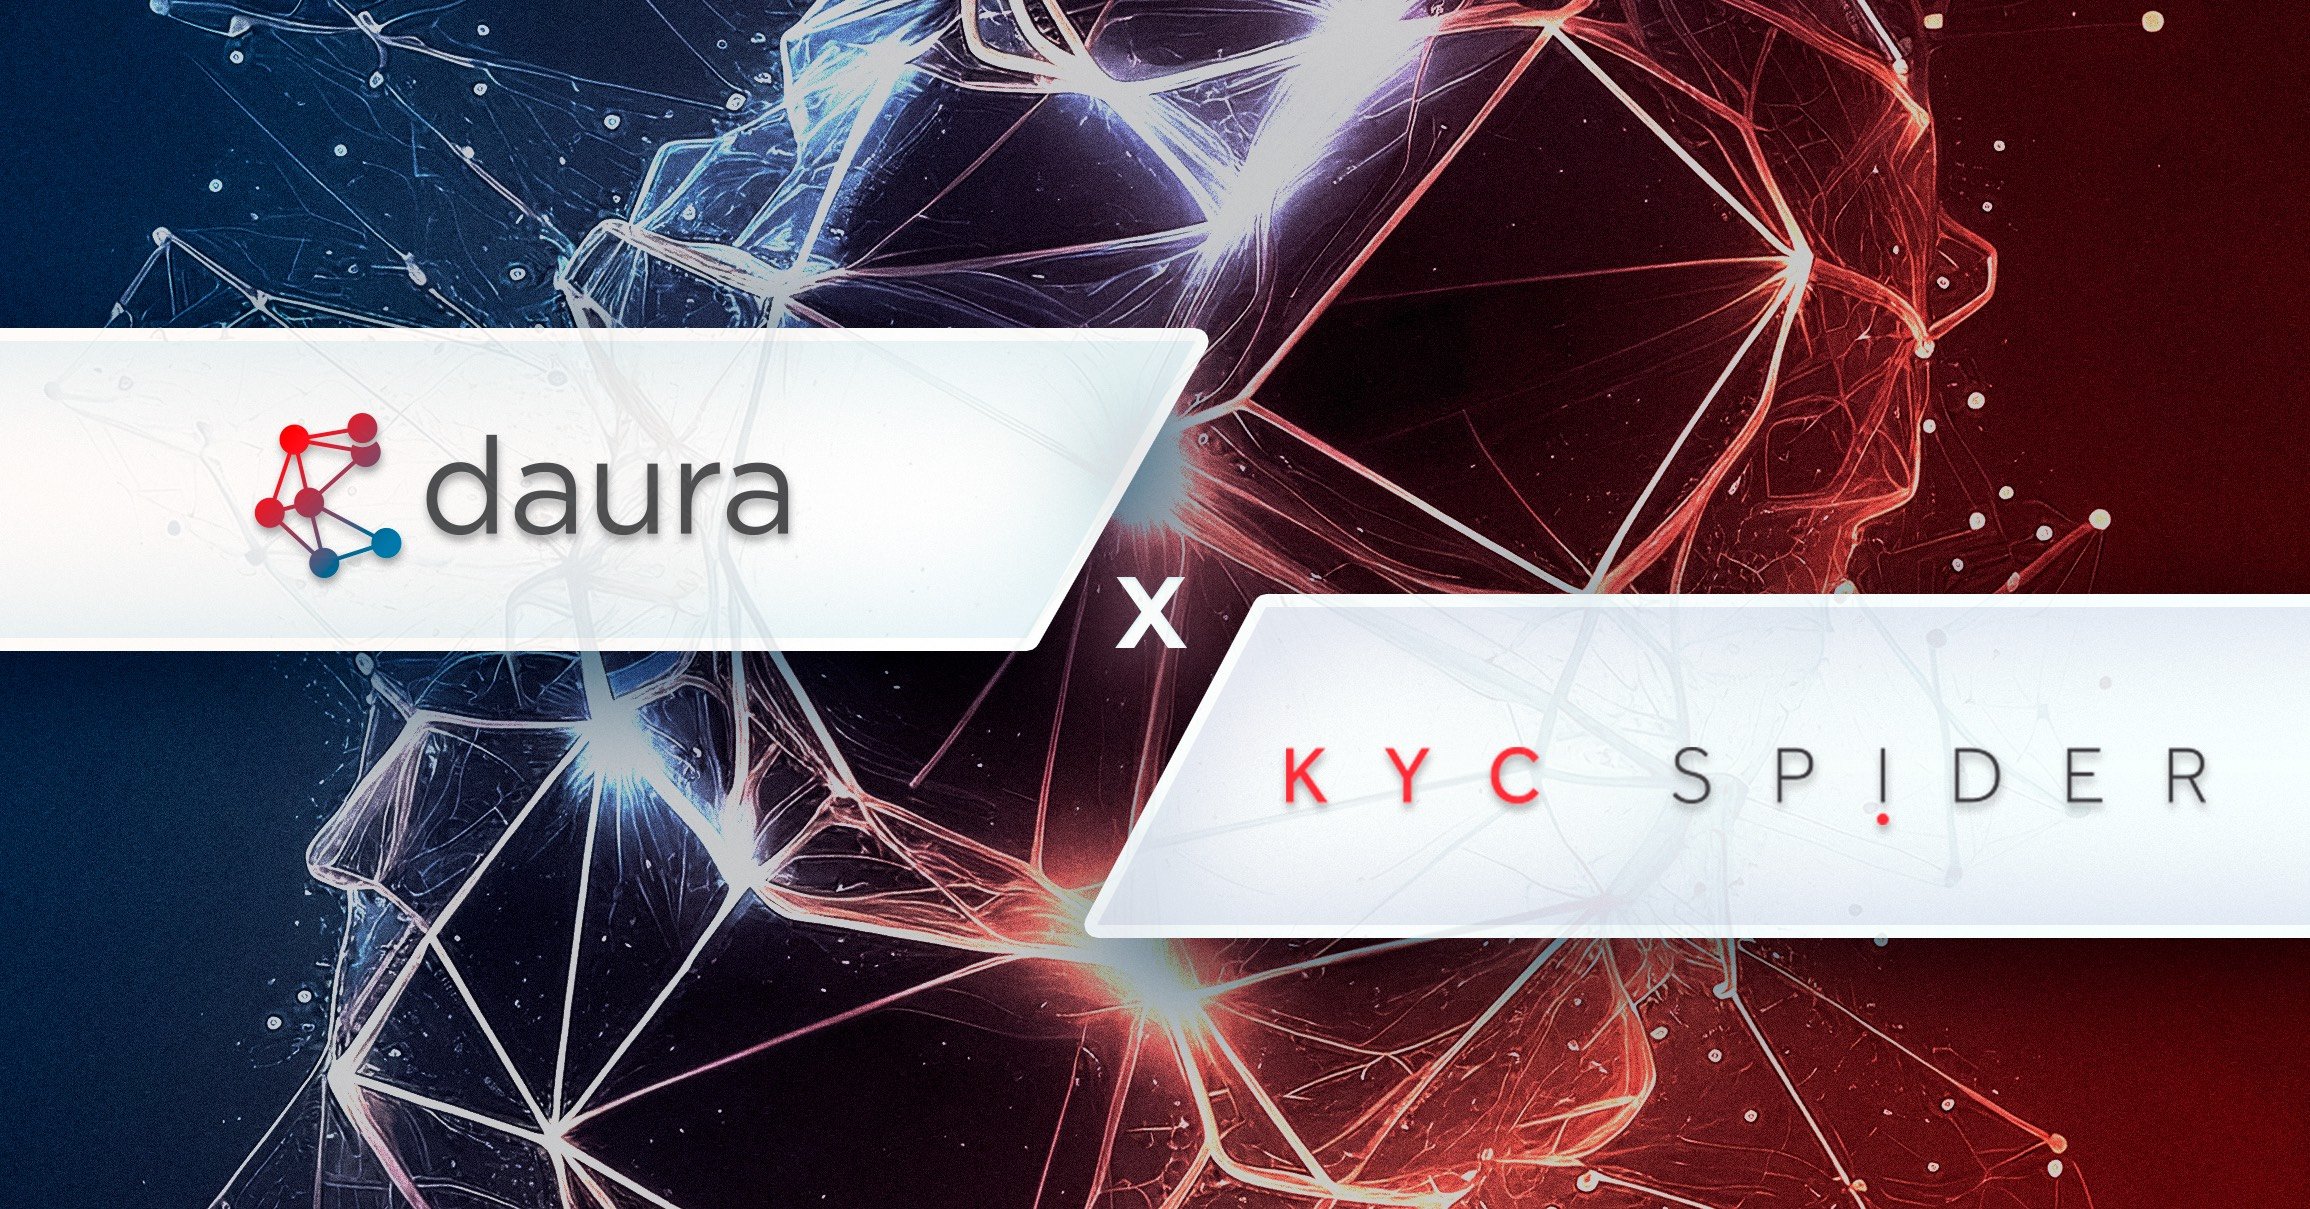 kyc_spider-announcement-visual copy-1